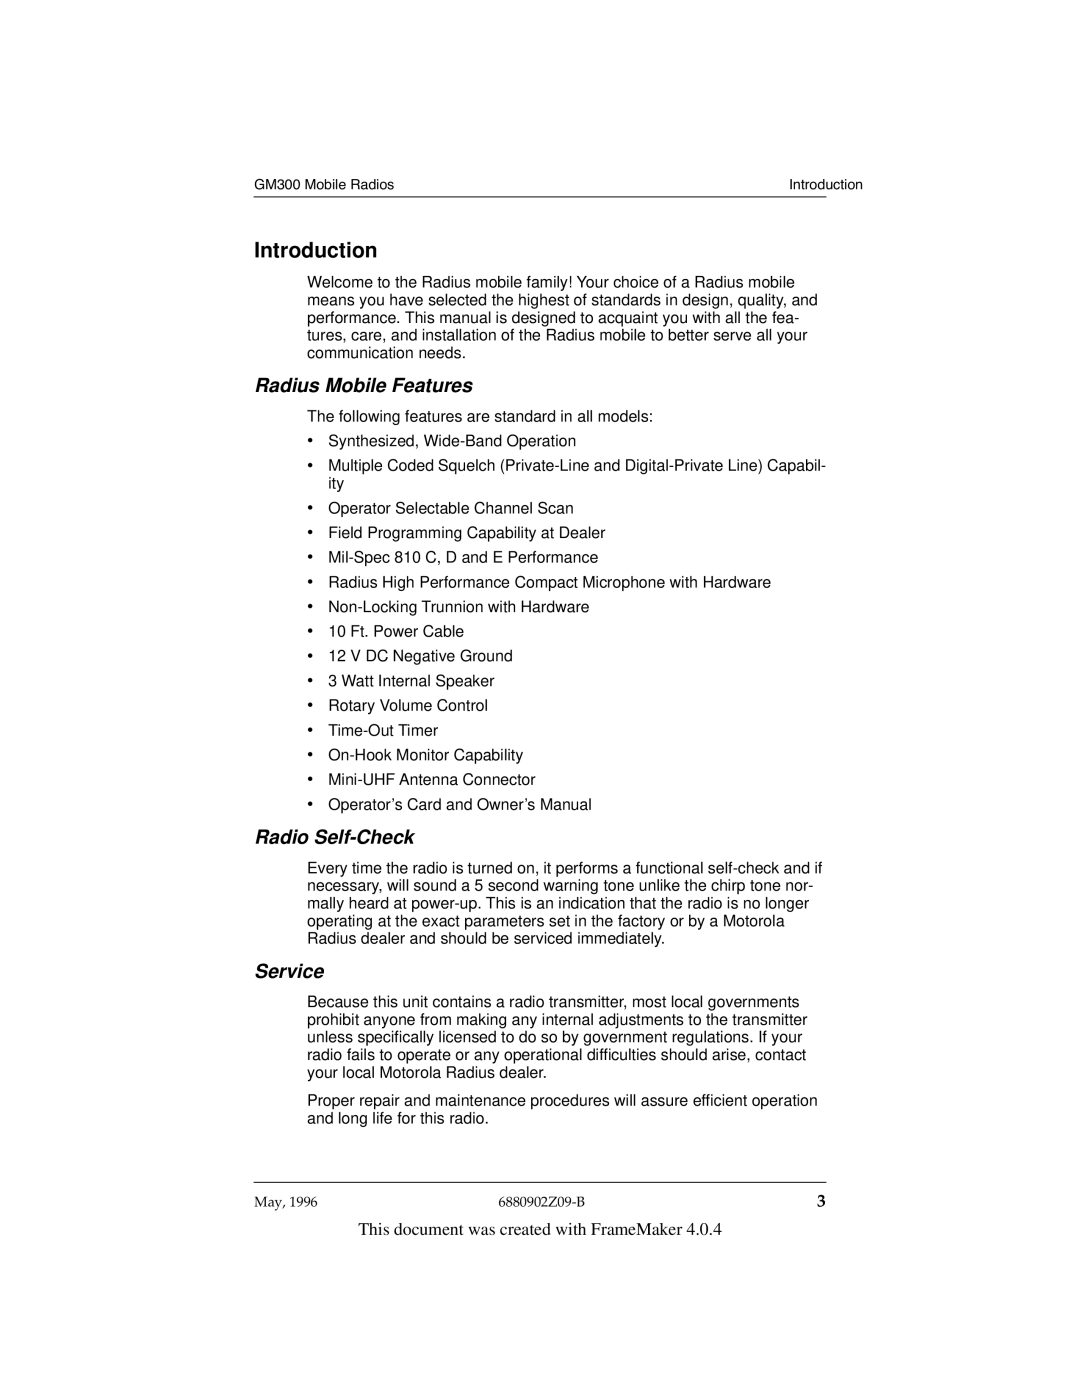 Motorola GM300 Introduction, Radius Mobile Features, Radio Self-Check, Service, This document was created with FrameMaker 